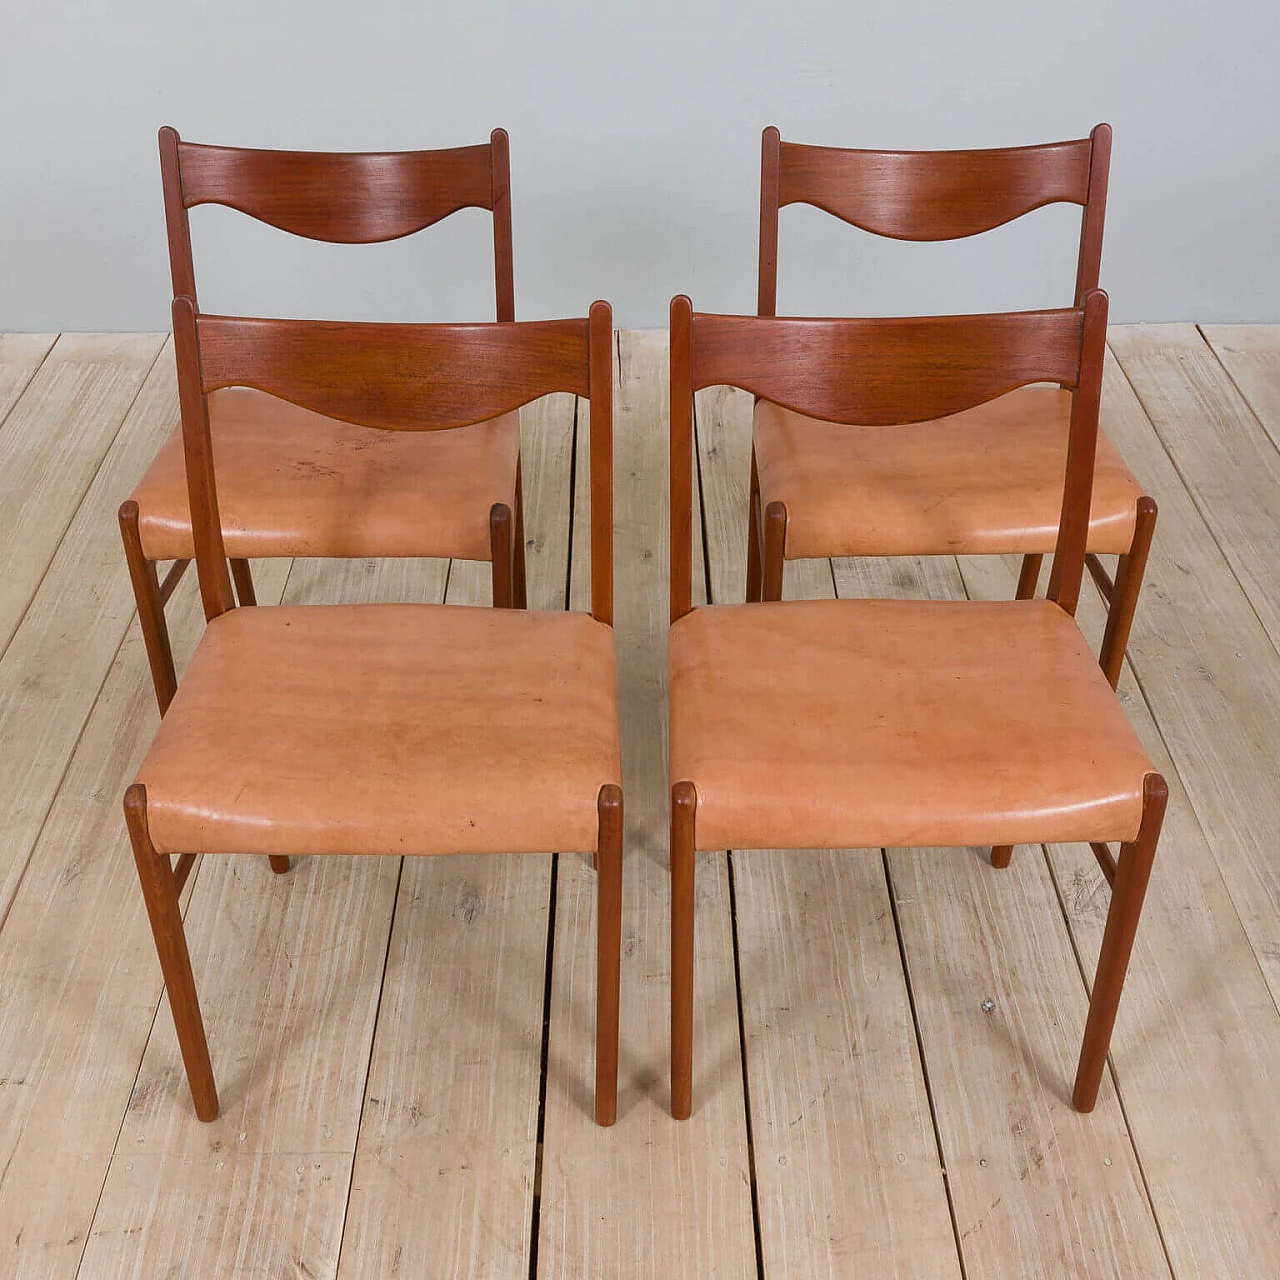 4 GS60 chairs in teak and leather by Arne Wahl Iversen for Glyngøre Stolefabrik, 60s 1